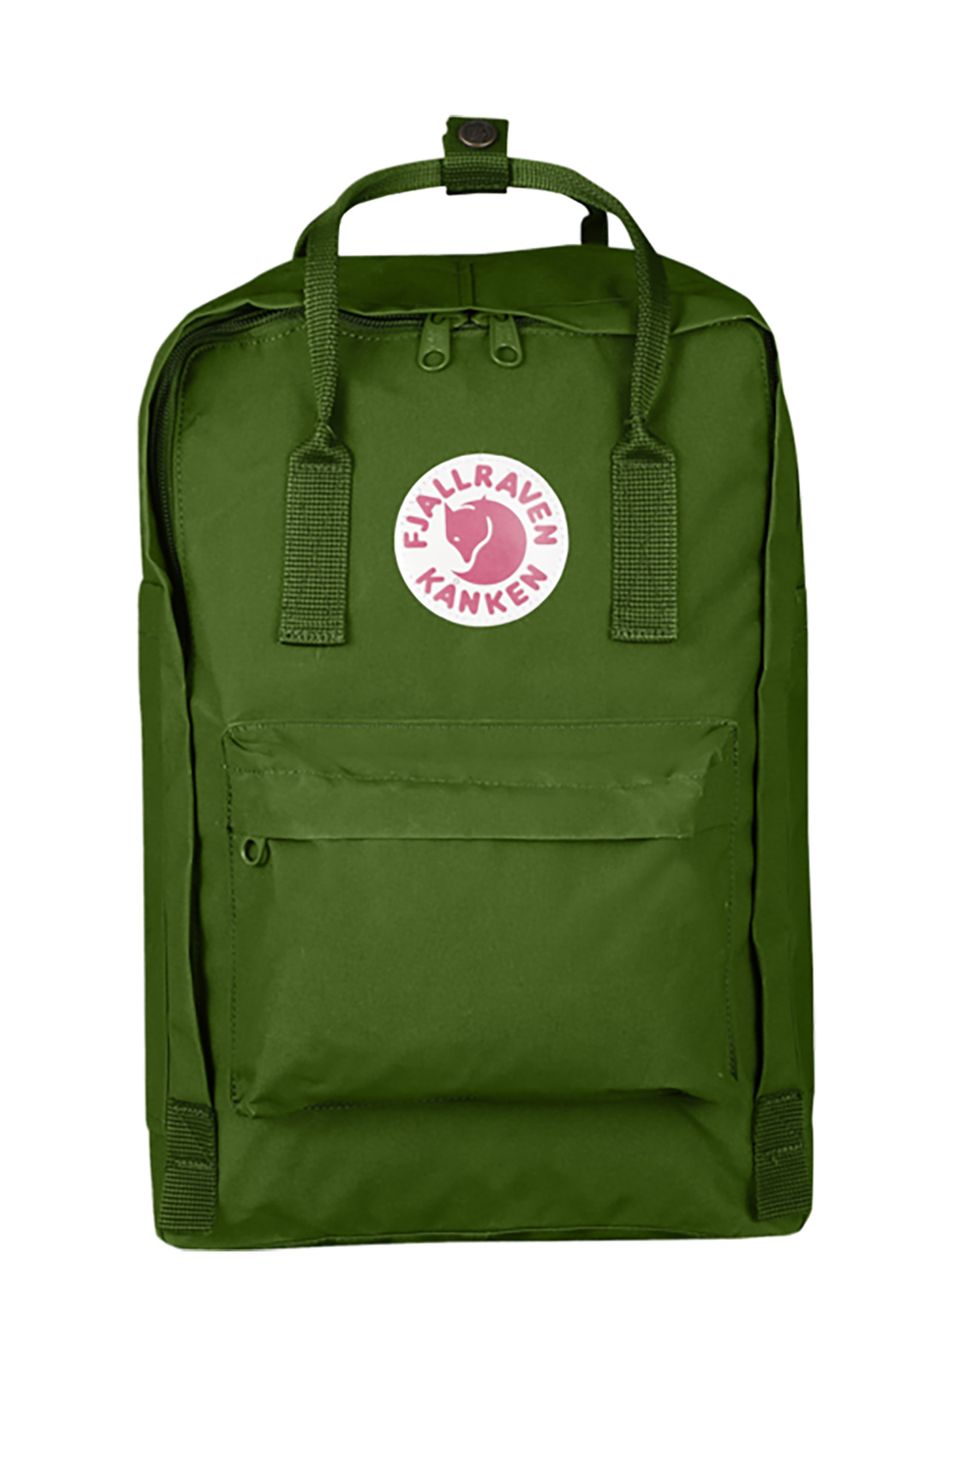 <p>The Old Faithful of backpacks but in Kermit green. </p><p>$75, <a href="http://rstyle.me/n/bvb3iebqb8f" target="_blank">ebags.com</a>.</p>